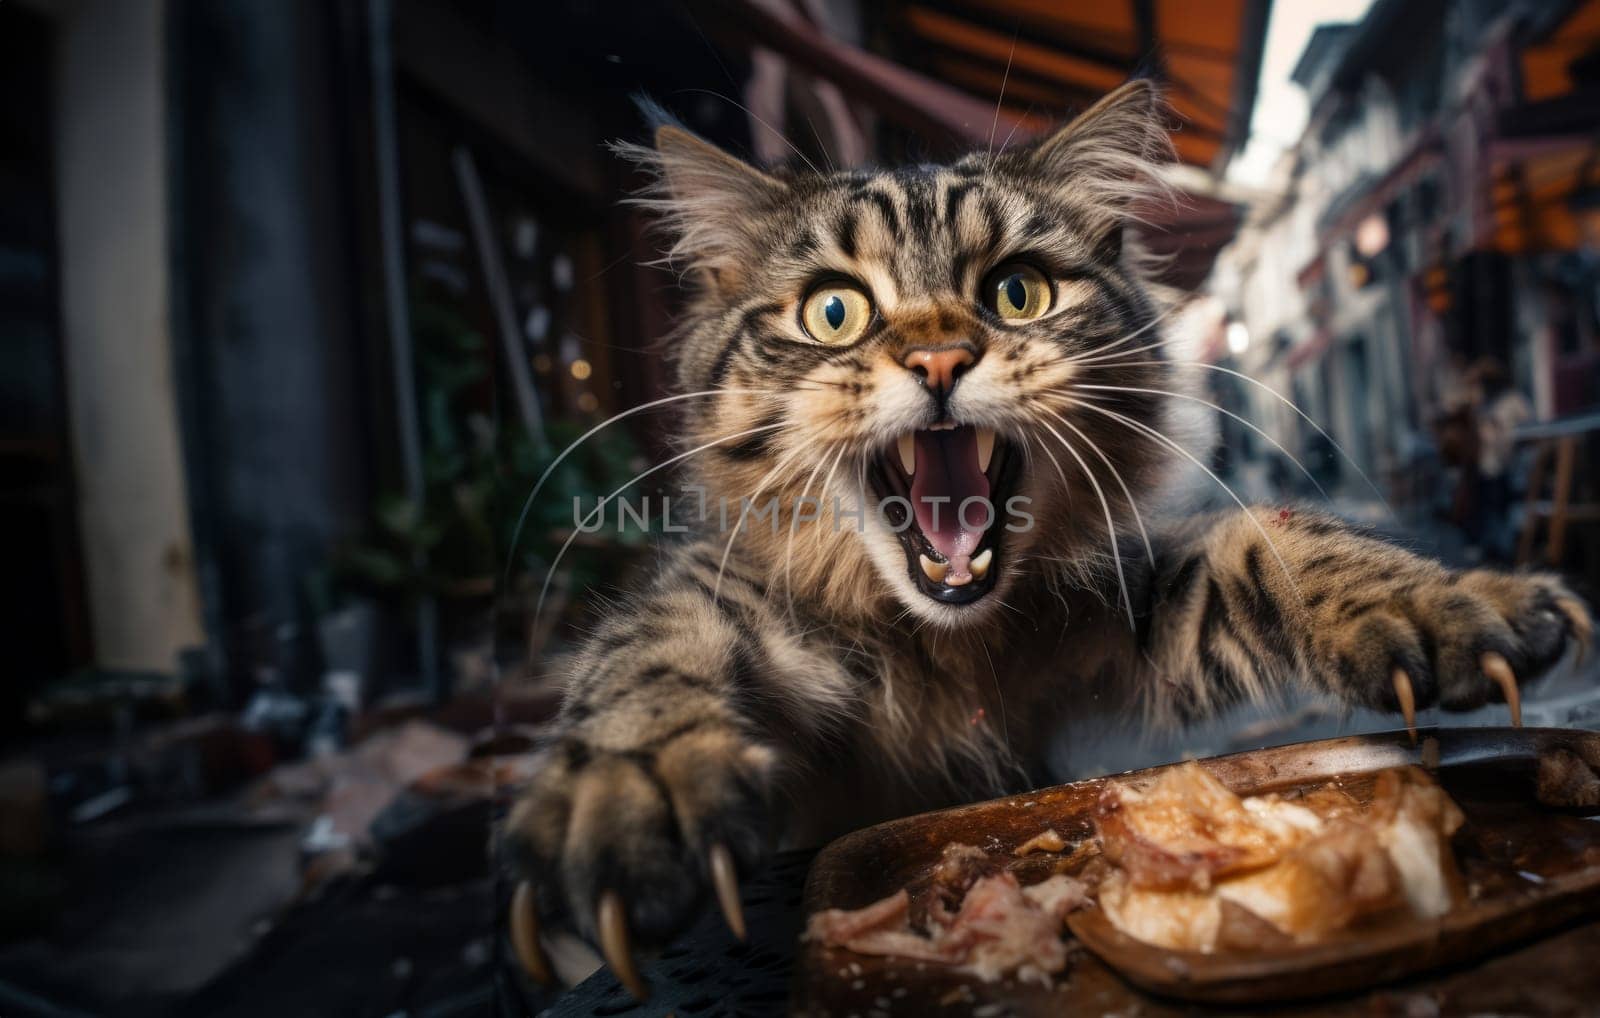 A hungry cat attacks its food with a wild fury.Generated image by dotshock